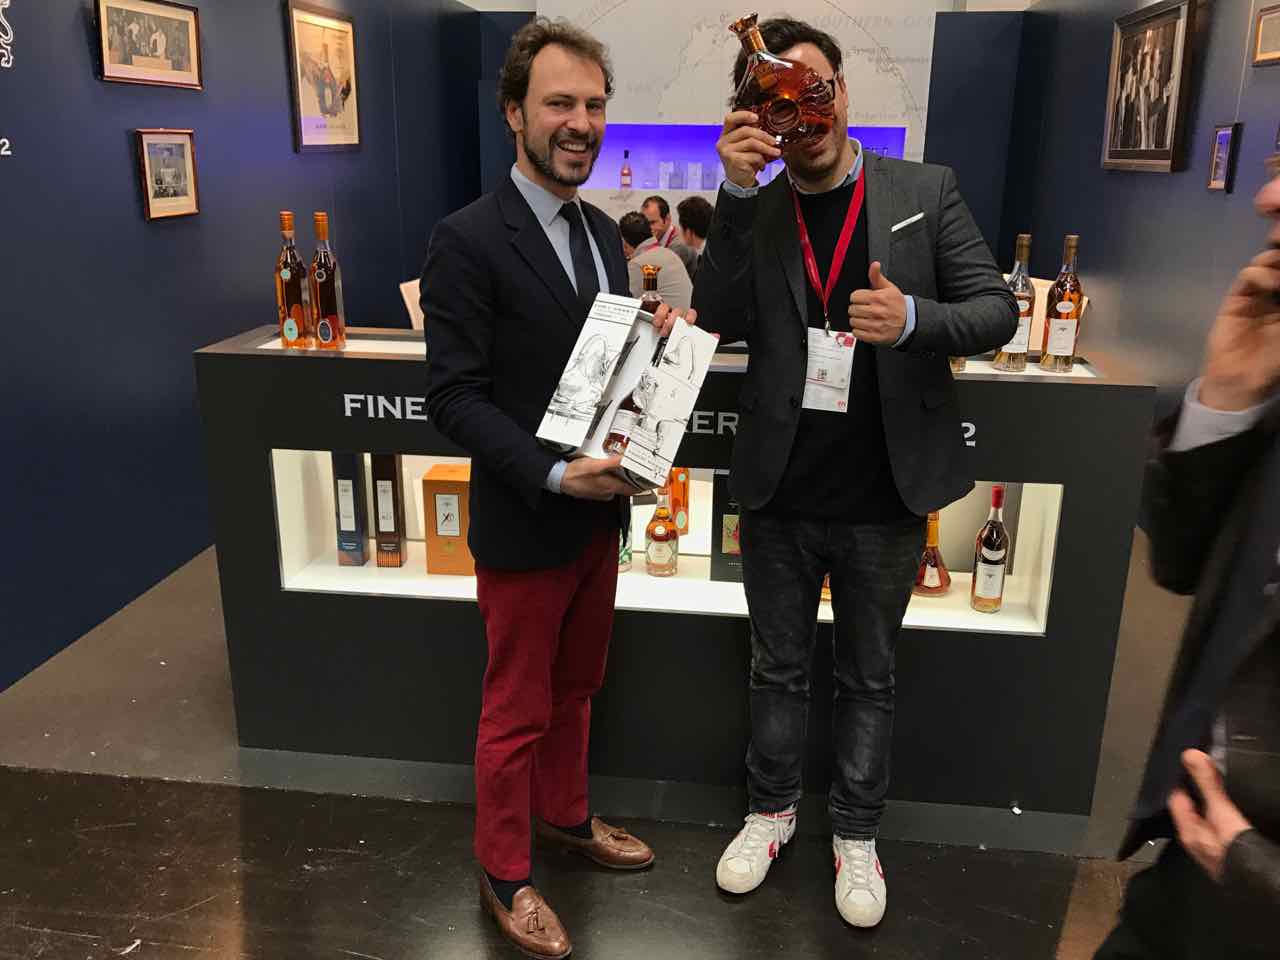 Max's Visit to Prowein 2017